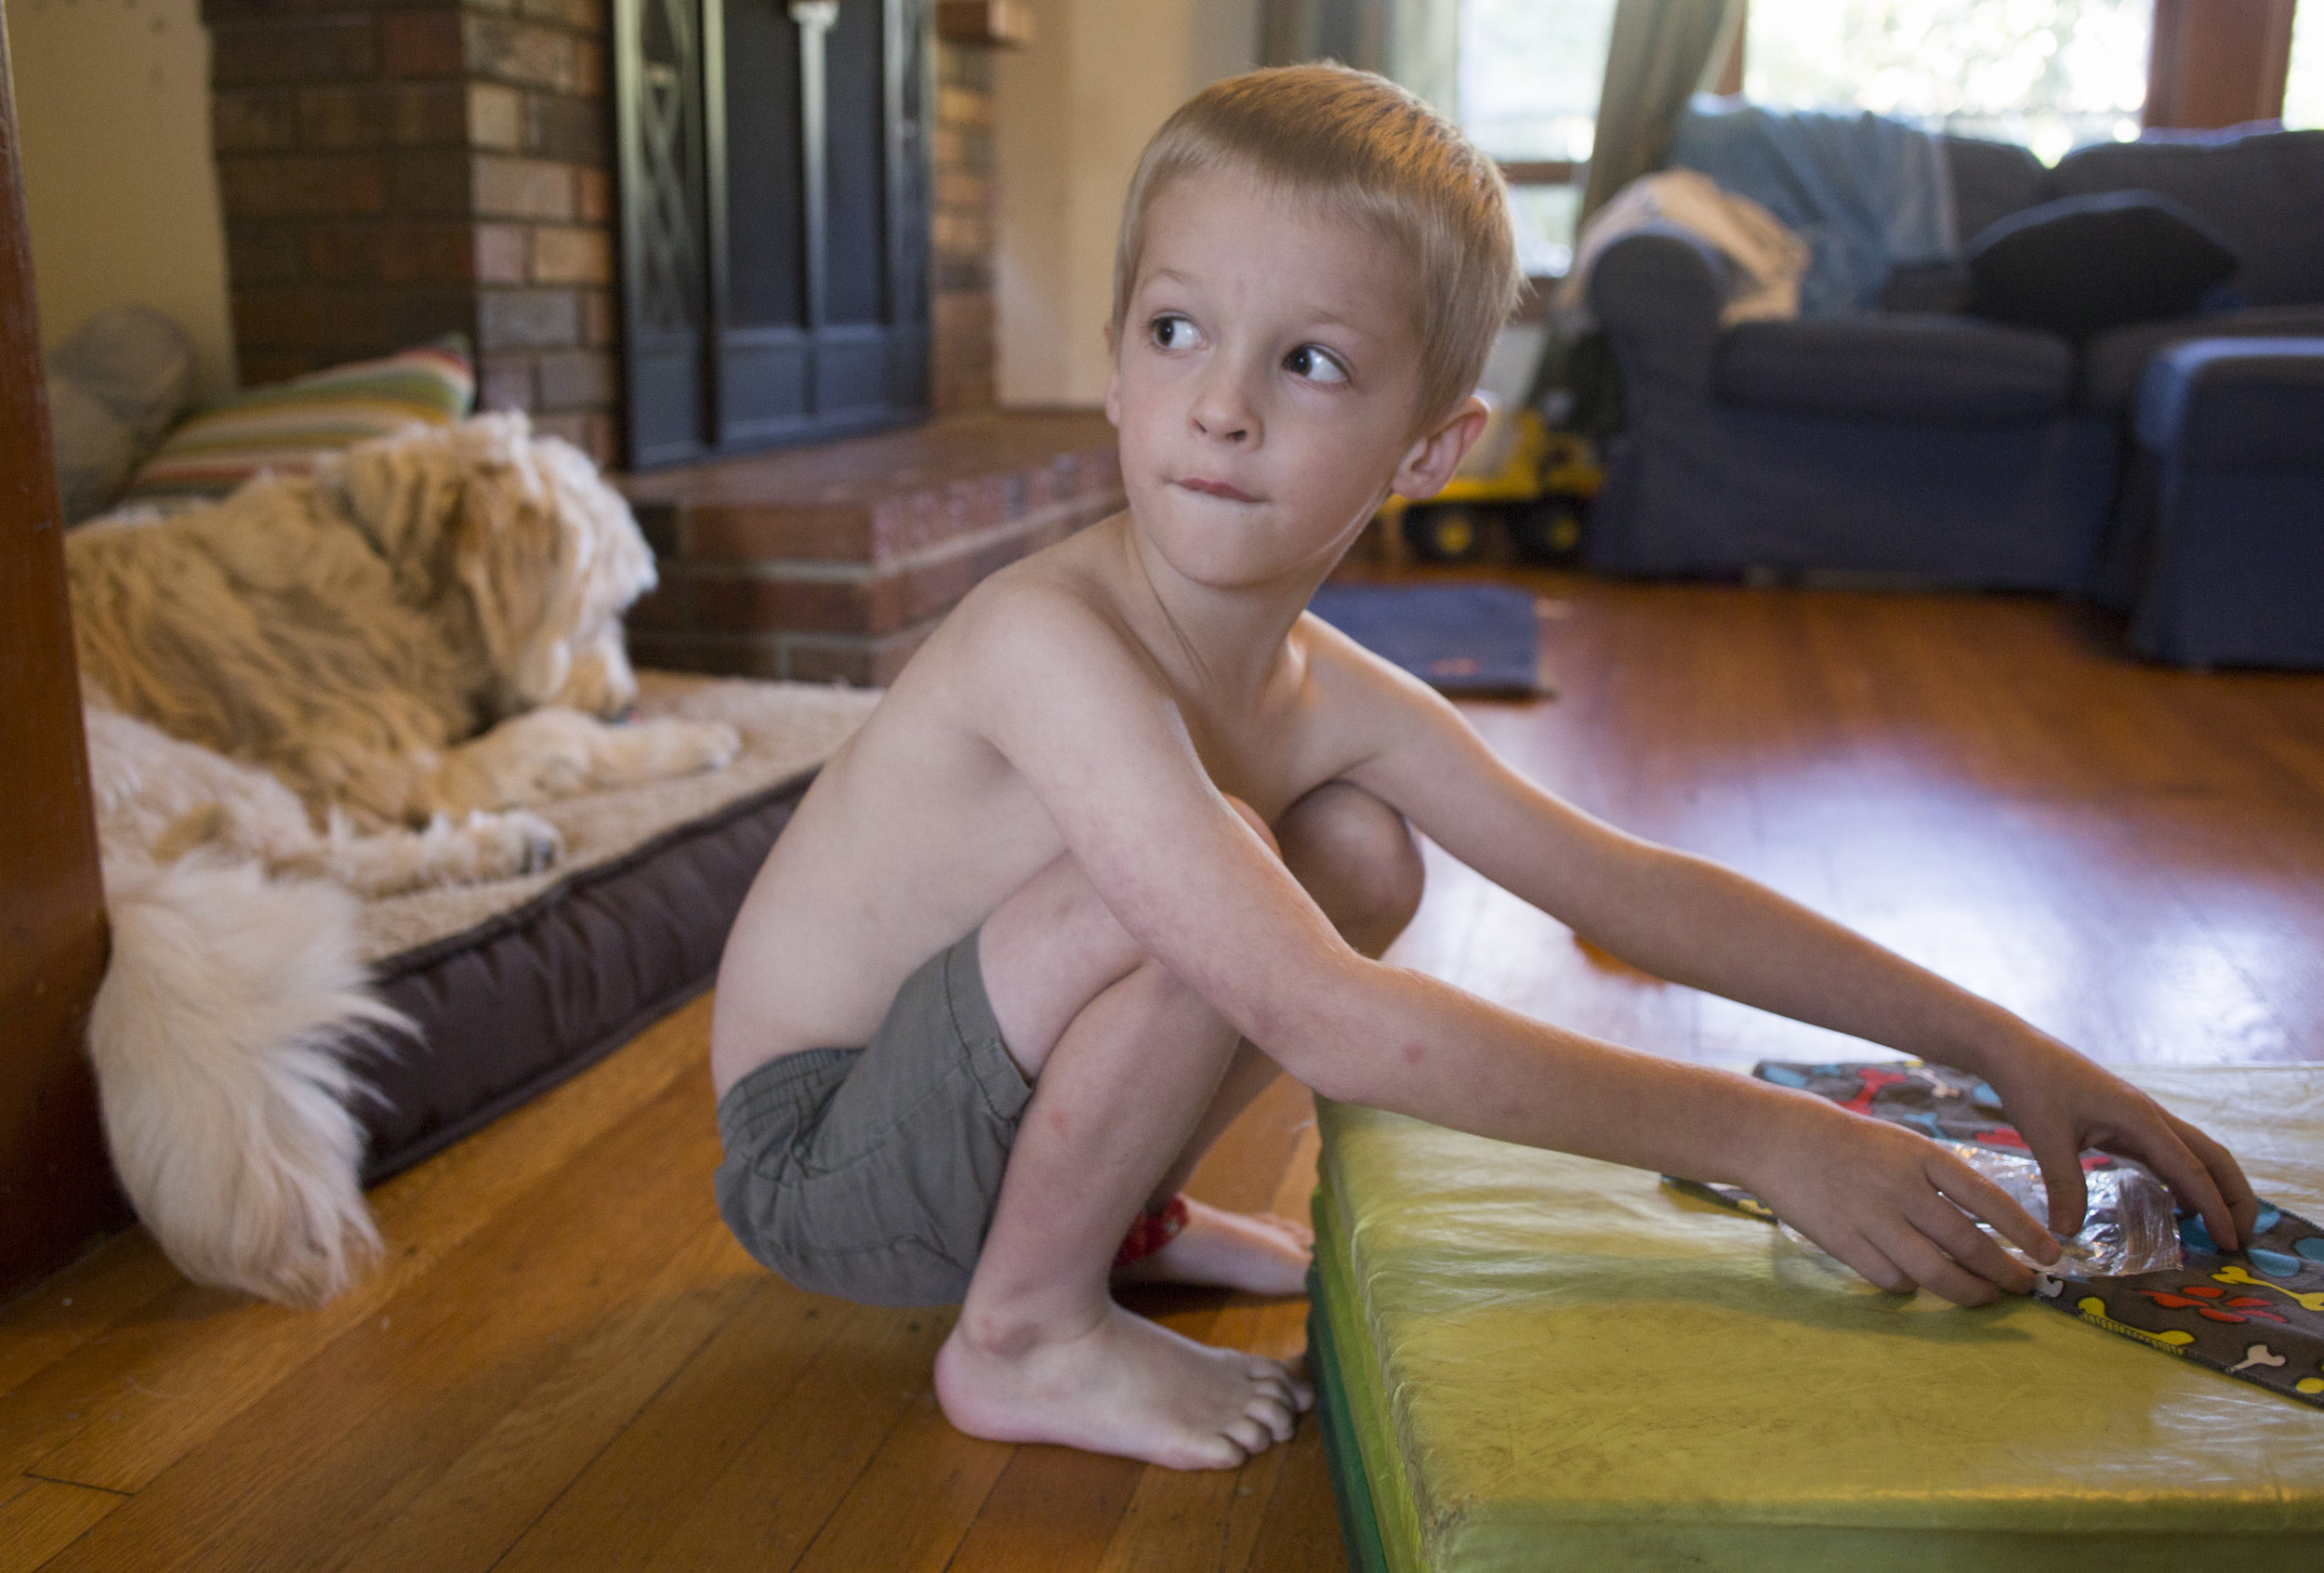  Josiah plays in the family room while Spad lays on his dog bed. The two are often in the same room together while doing separate activities. Josiah’s parents agree that while it may not always be obvious, Spad’s presence has had a positive effect on